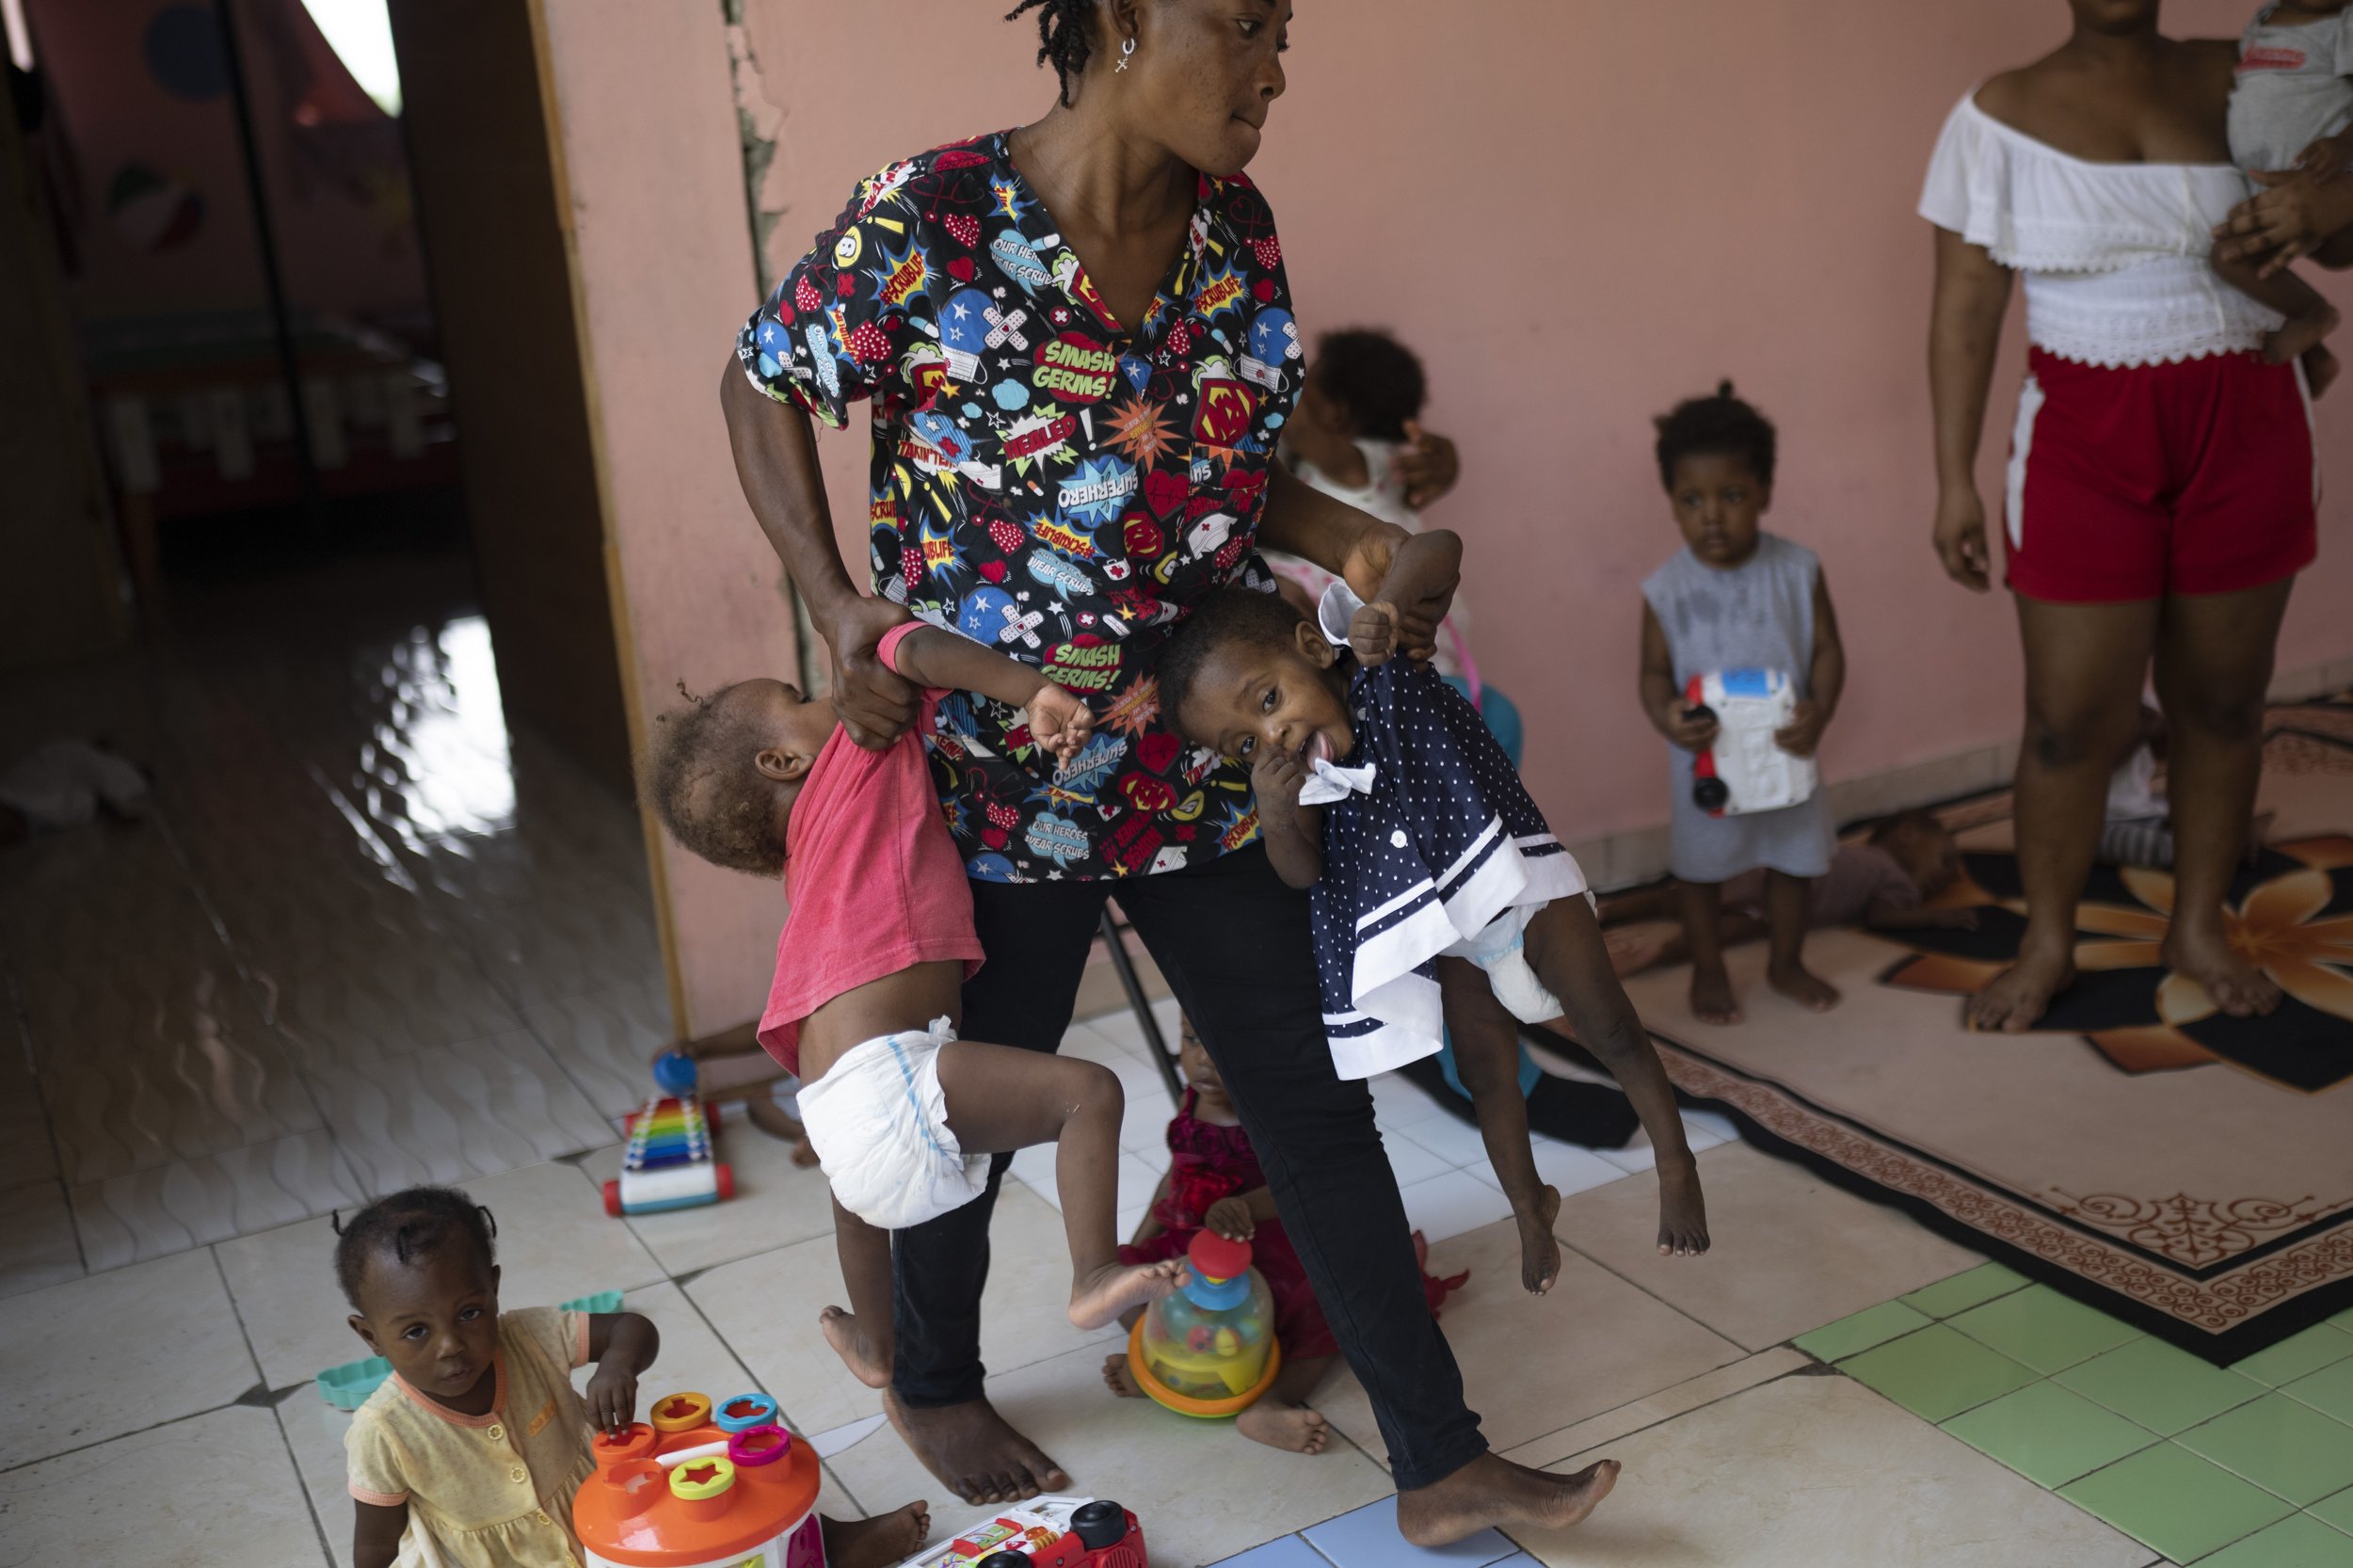  A woman carries two children as she takes care of them at Fontaine Hospital Center, which treats malnourished children in the Cite Soleil neighborhood of Port-au-Prince, Haiti, on May 29, 2023. (AP Photo/Ariana Cubillos) 